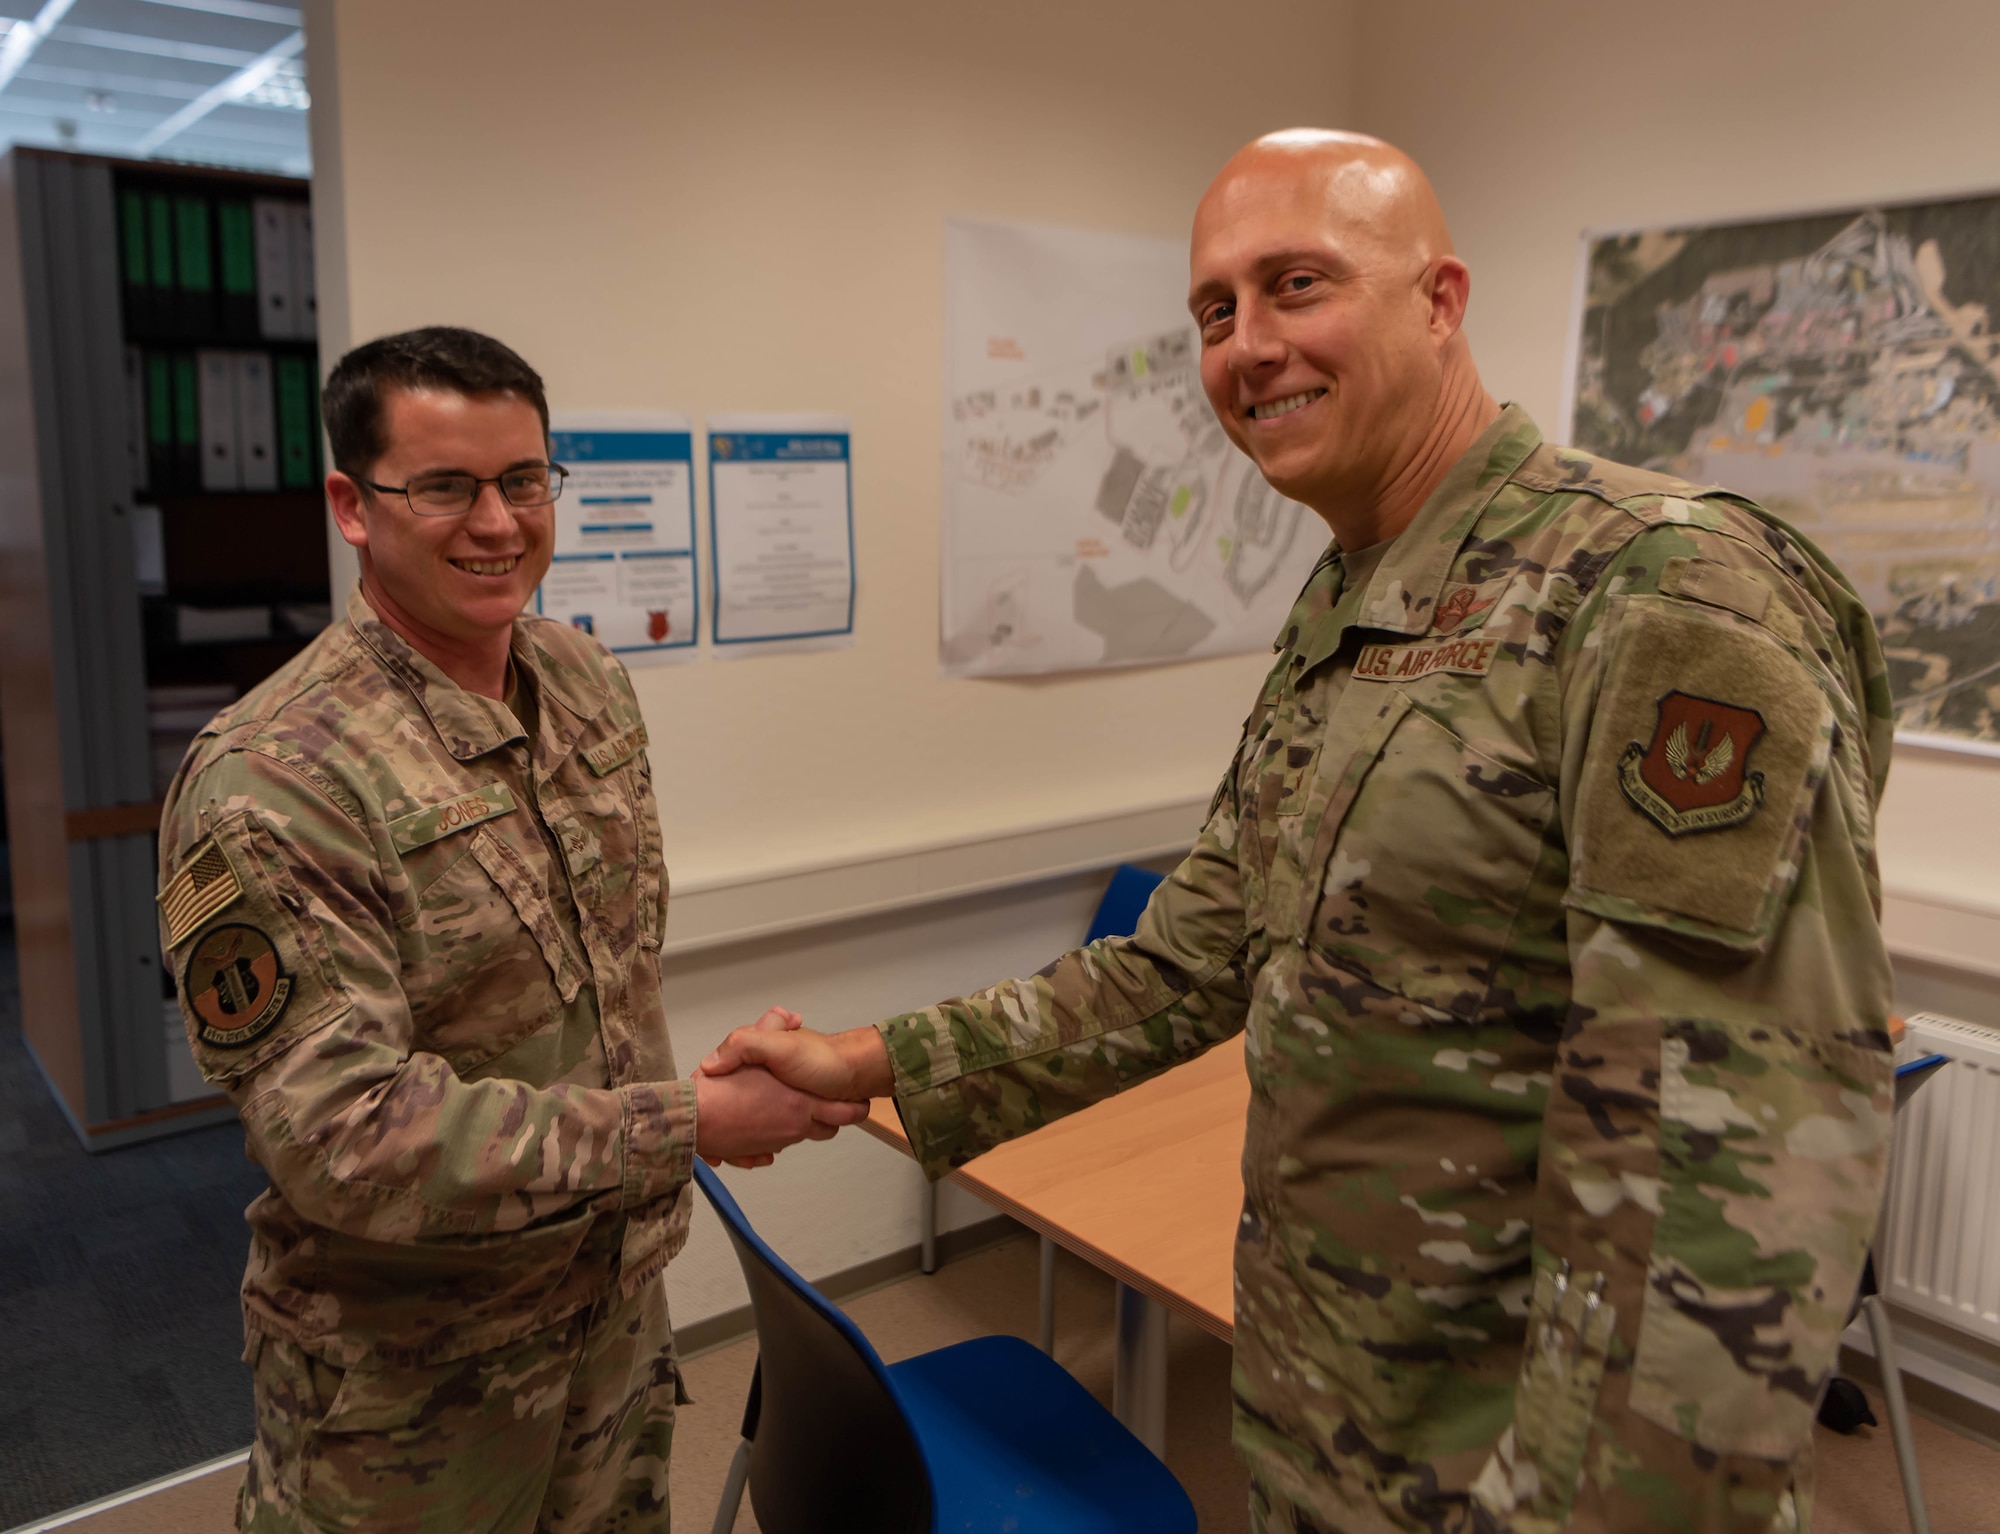 U.S. Air Force Senior Airman James Jones, a controlled movement area escort and project manager assigned to the 86th Civil Engineering Squadron, shakes hands with USAF Brig. Gen. Joshua Olson, 86th Airlift Wing commander at Ramstein Air Base, Germany, July 22, 2021. Jones was recognized as Airlifter of the Week for his ability to improve processes at Ramstein such as the escort augmentee program.
(U.S. Air Force photo by Airman Jared Lovett)